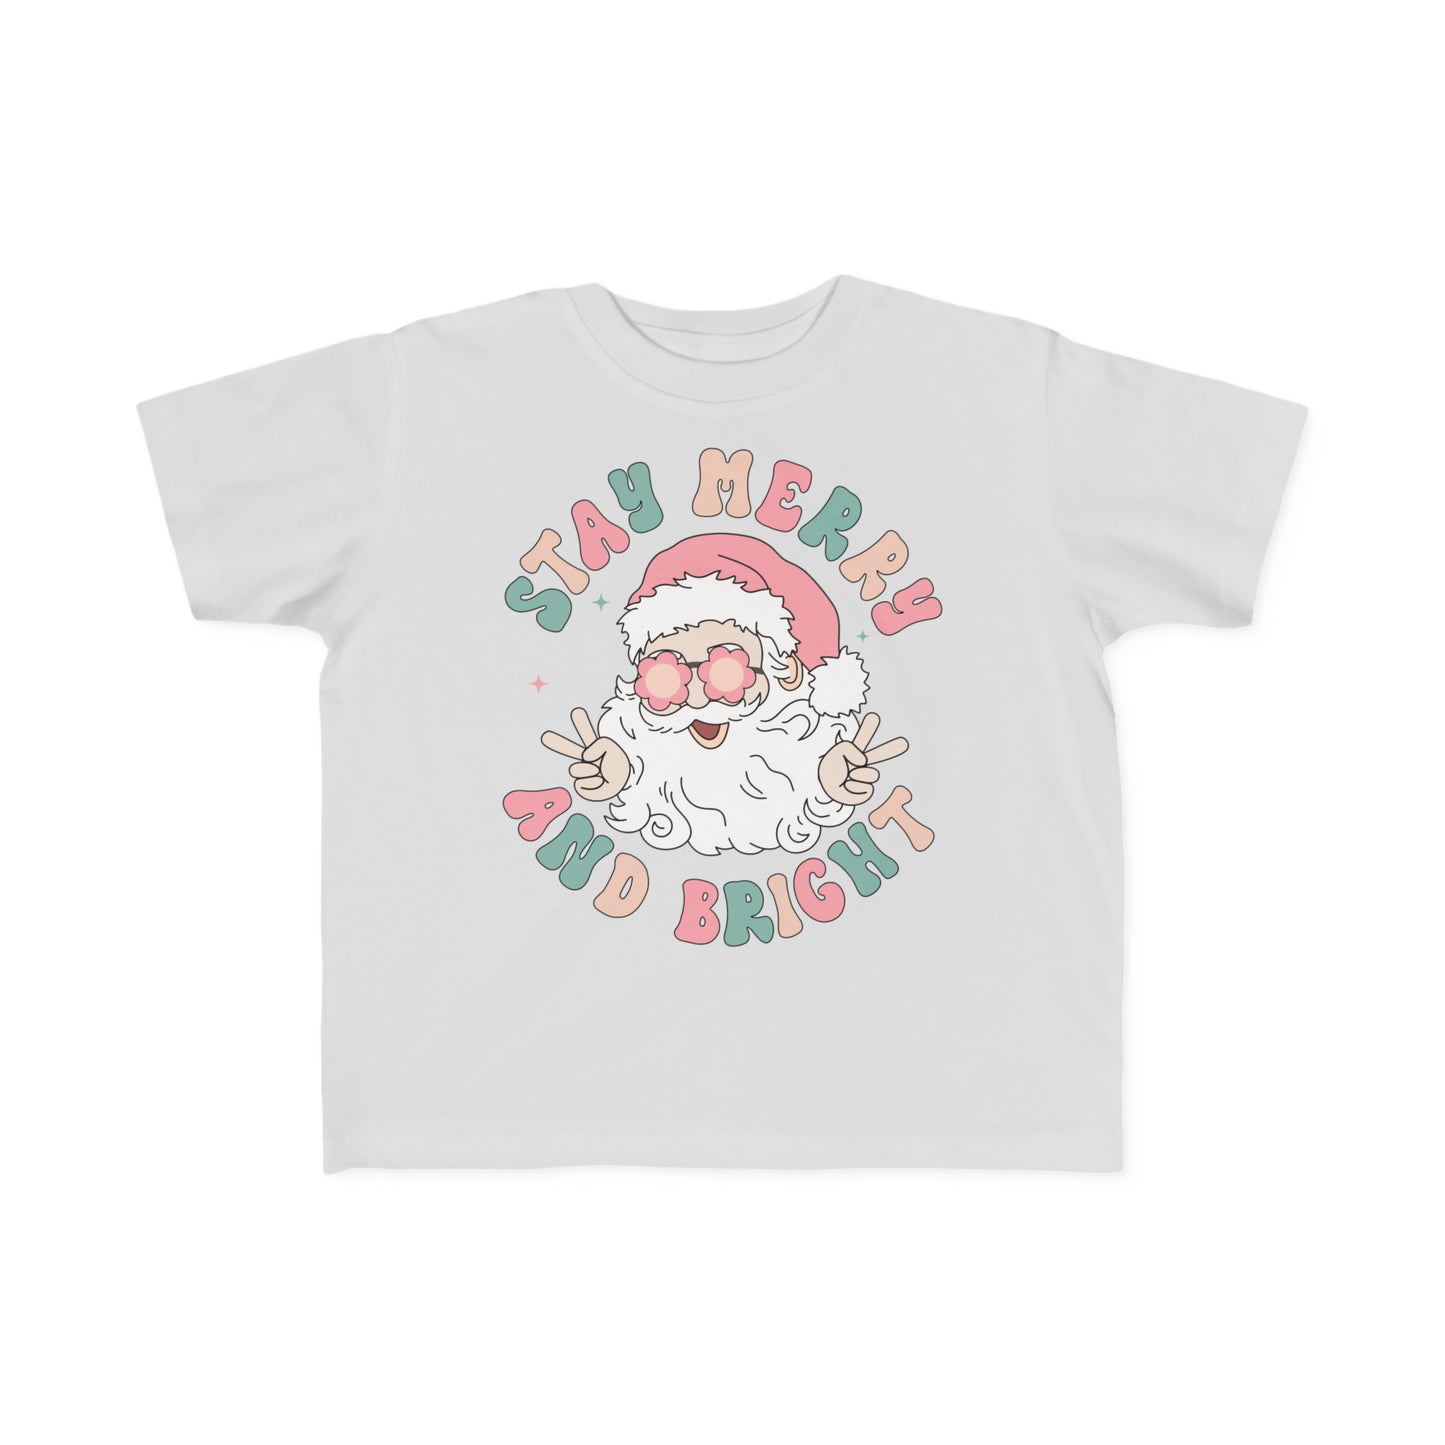 Stay Merry and Bright Christmas Tree Toddler's Fine Jersey Tee